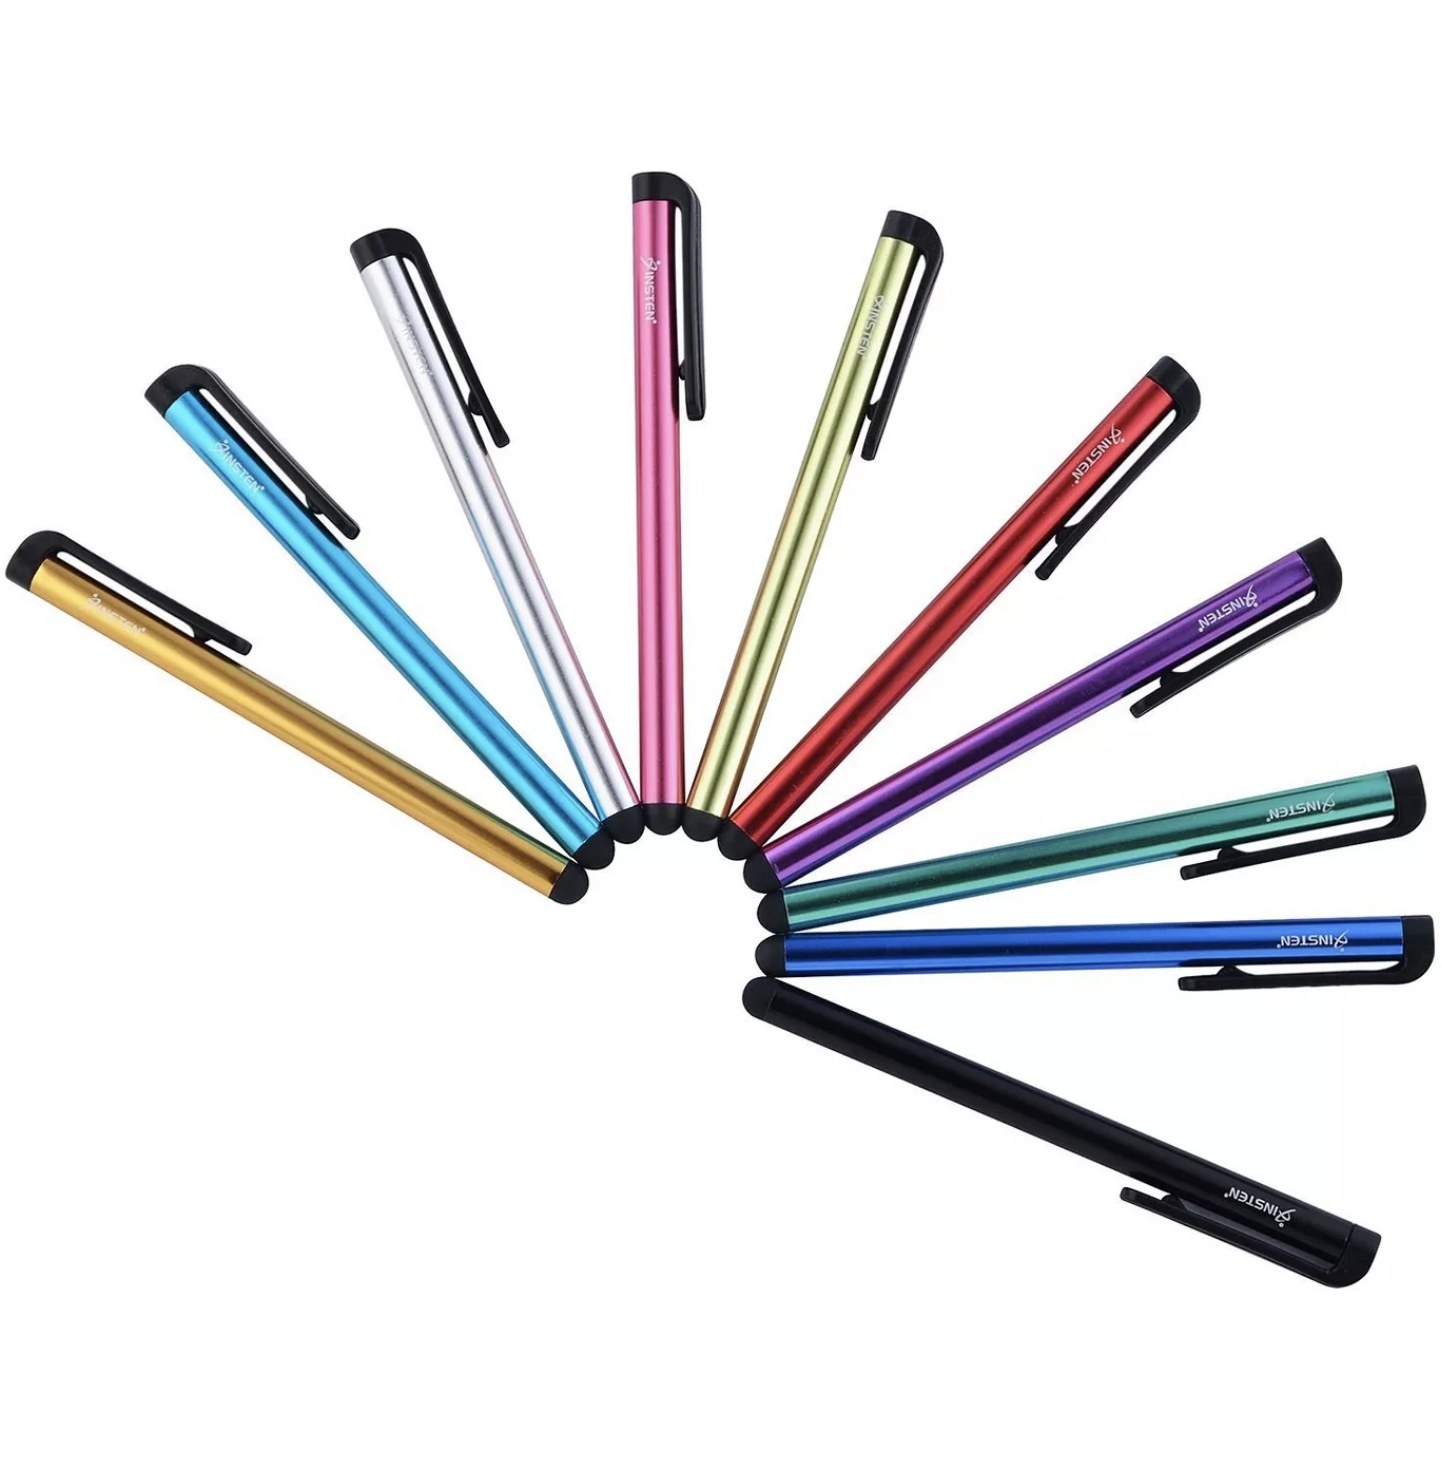 Universal stylus pens for phones or tables in various colors